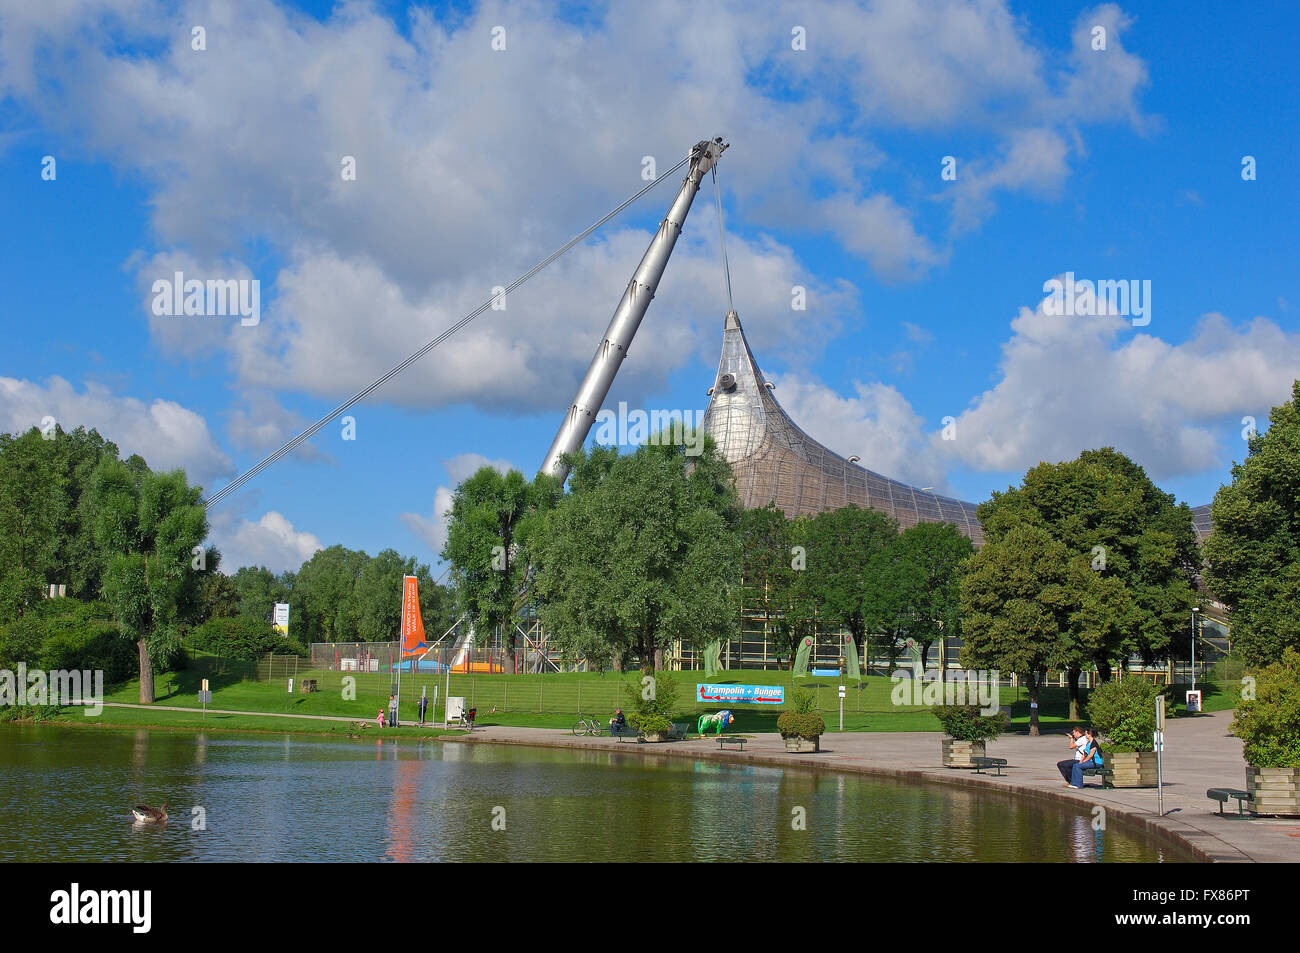 Olympia Park High Resolution Stock Photography and Images - Alamy